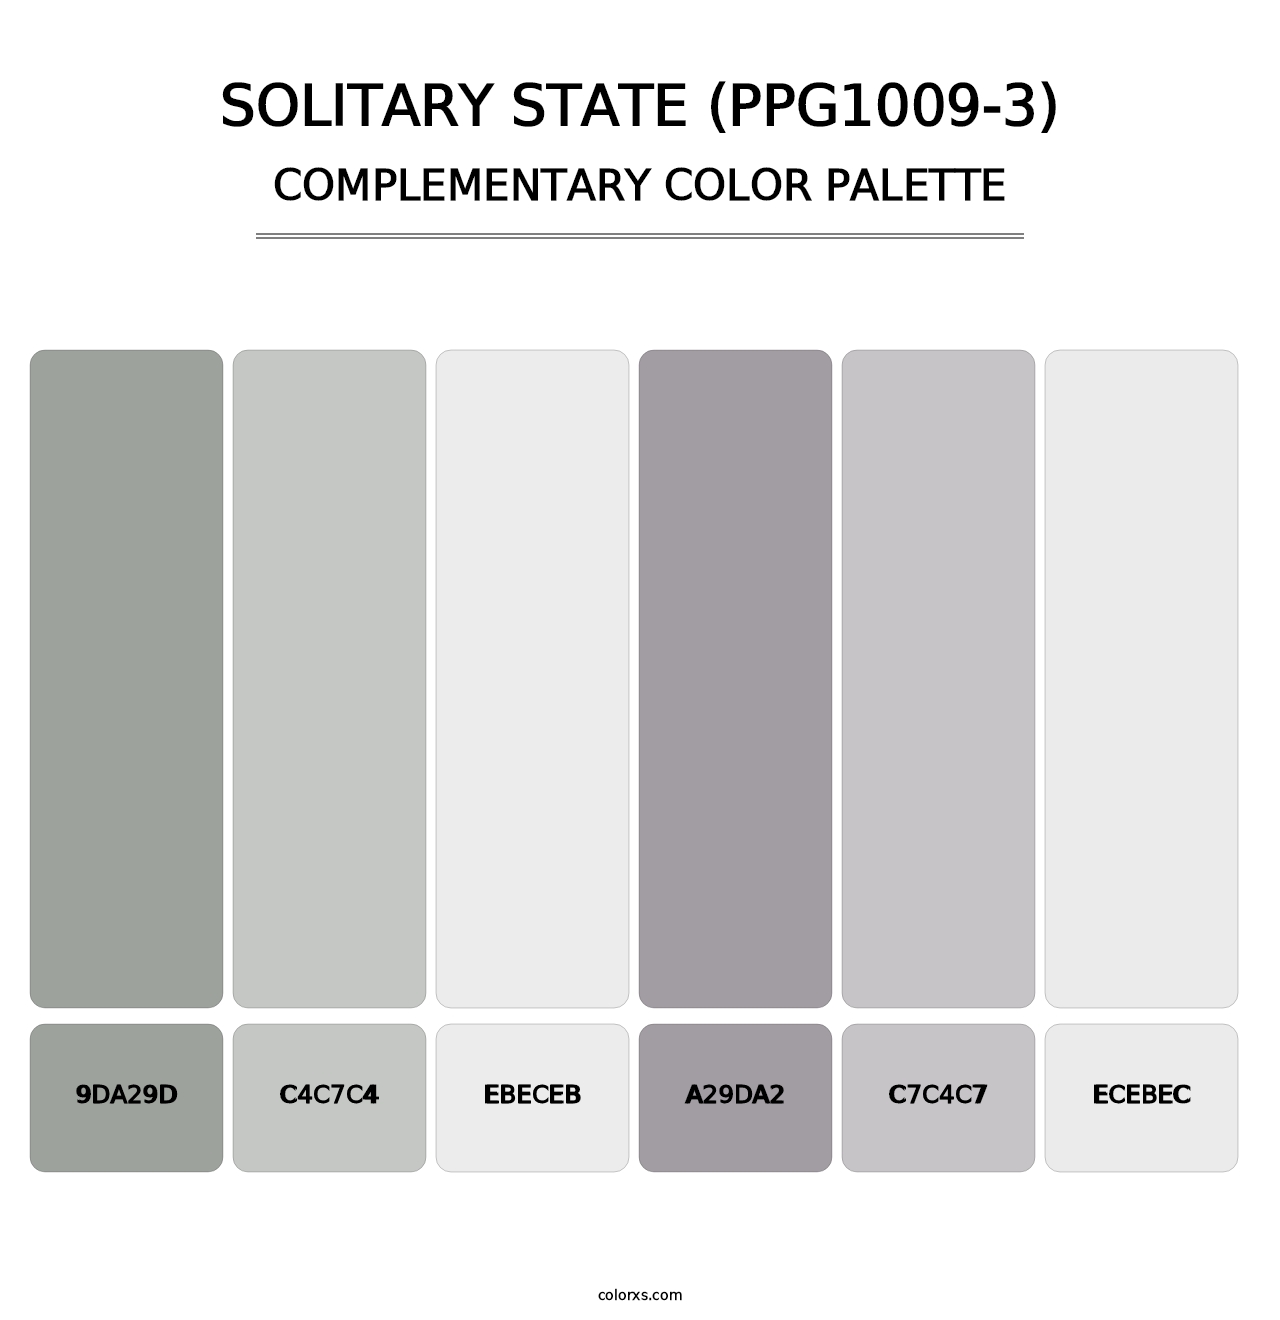 Solitary State (PPG1009-3) - Complementary Color Palette